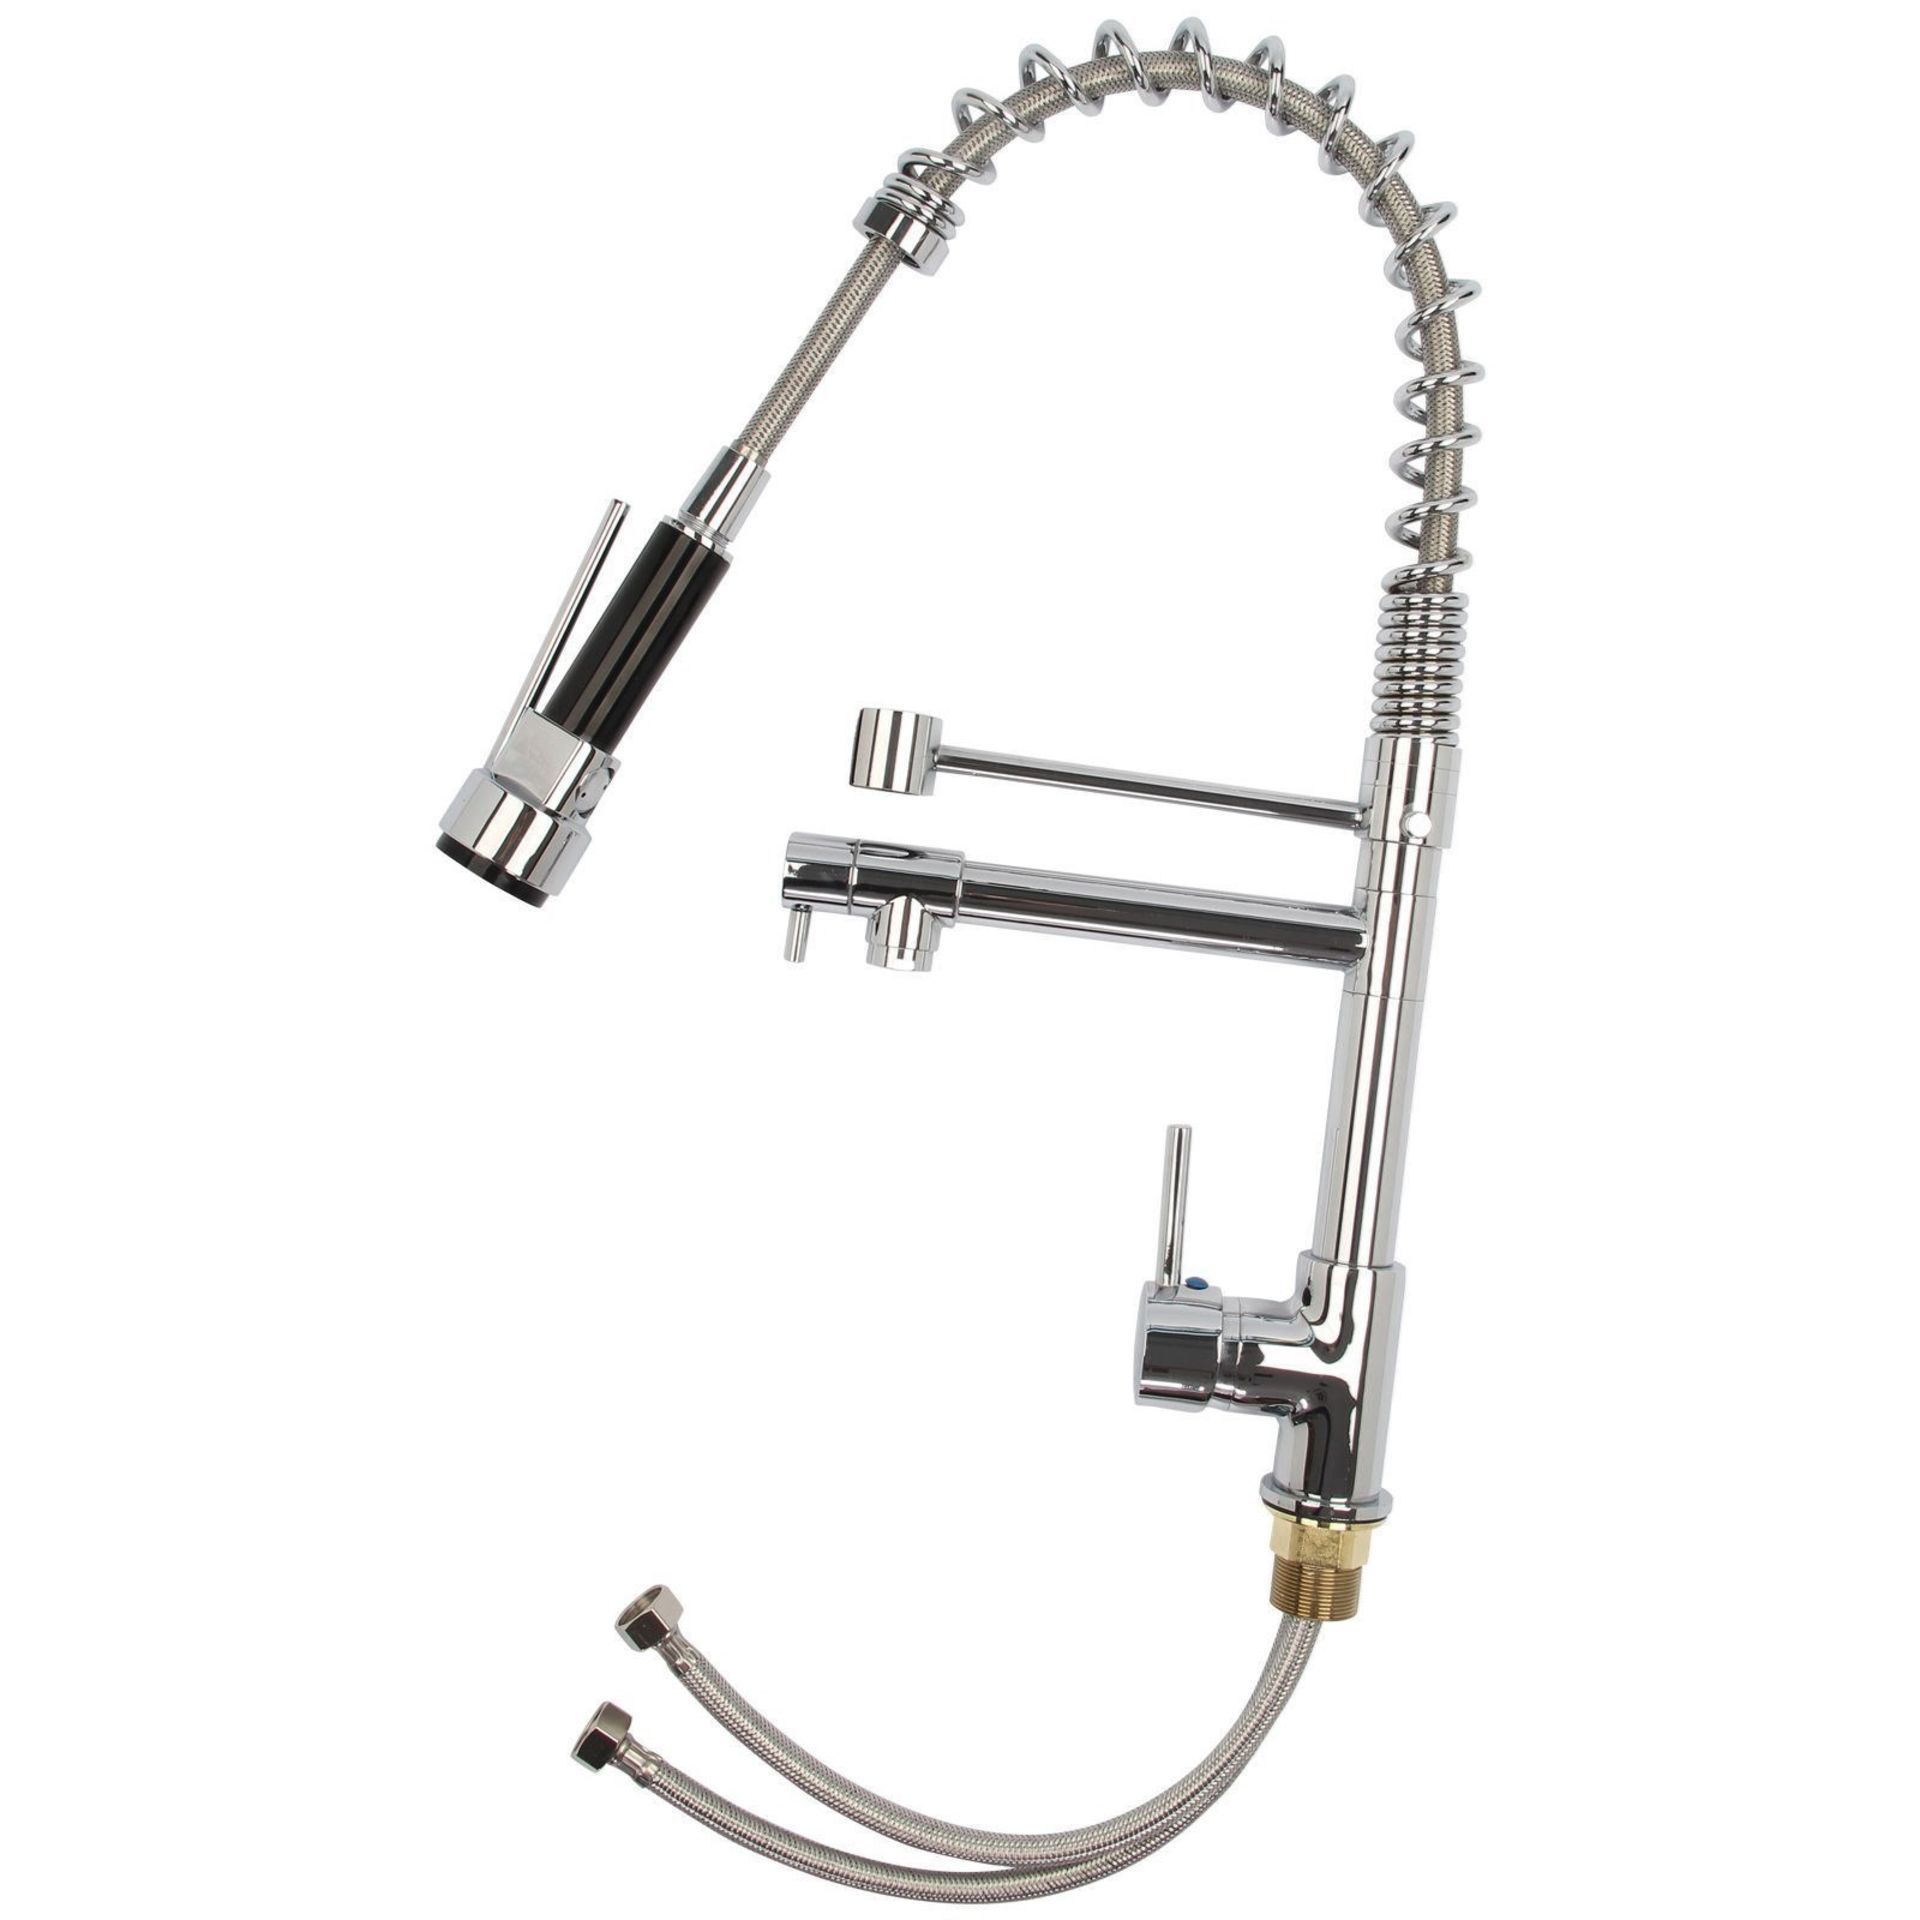 Bentley Modern Monobloc Chrome Brass Pull Out Spray Mixer Tap.RRP £349.99.This tap is from our... - Image 2 of 2